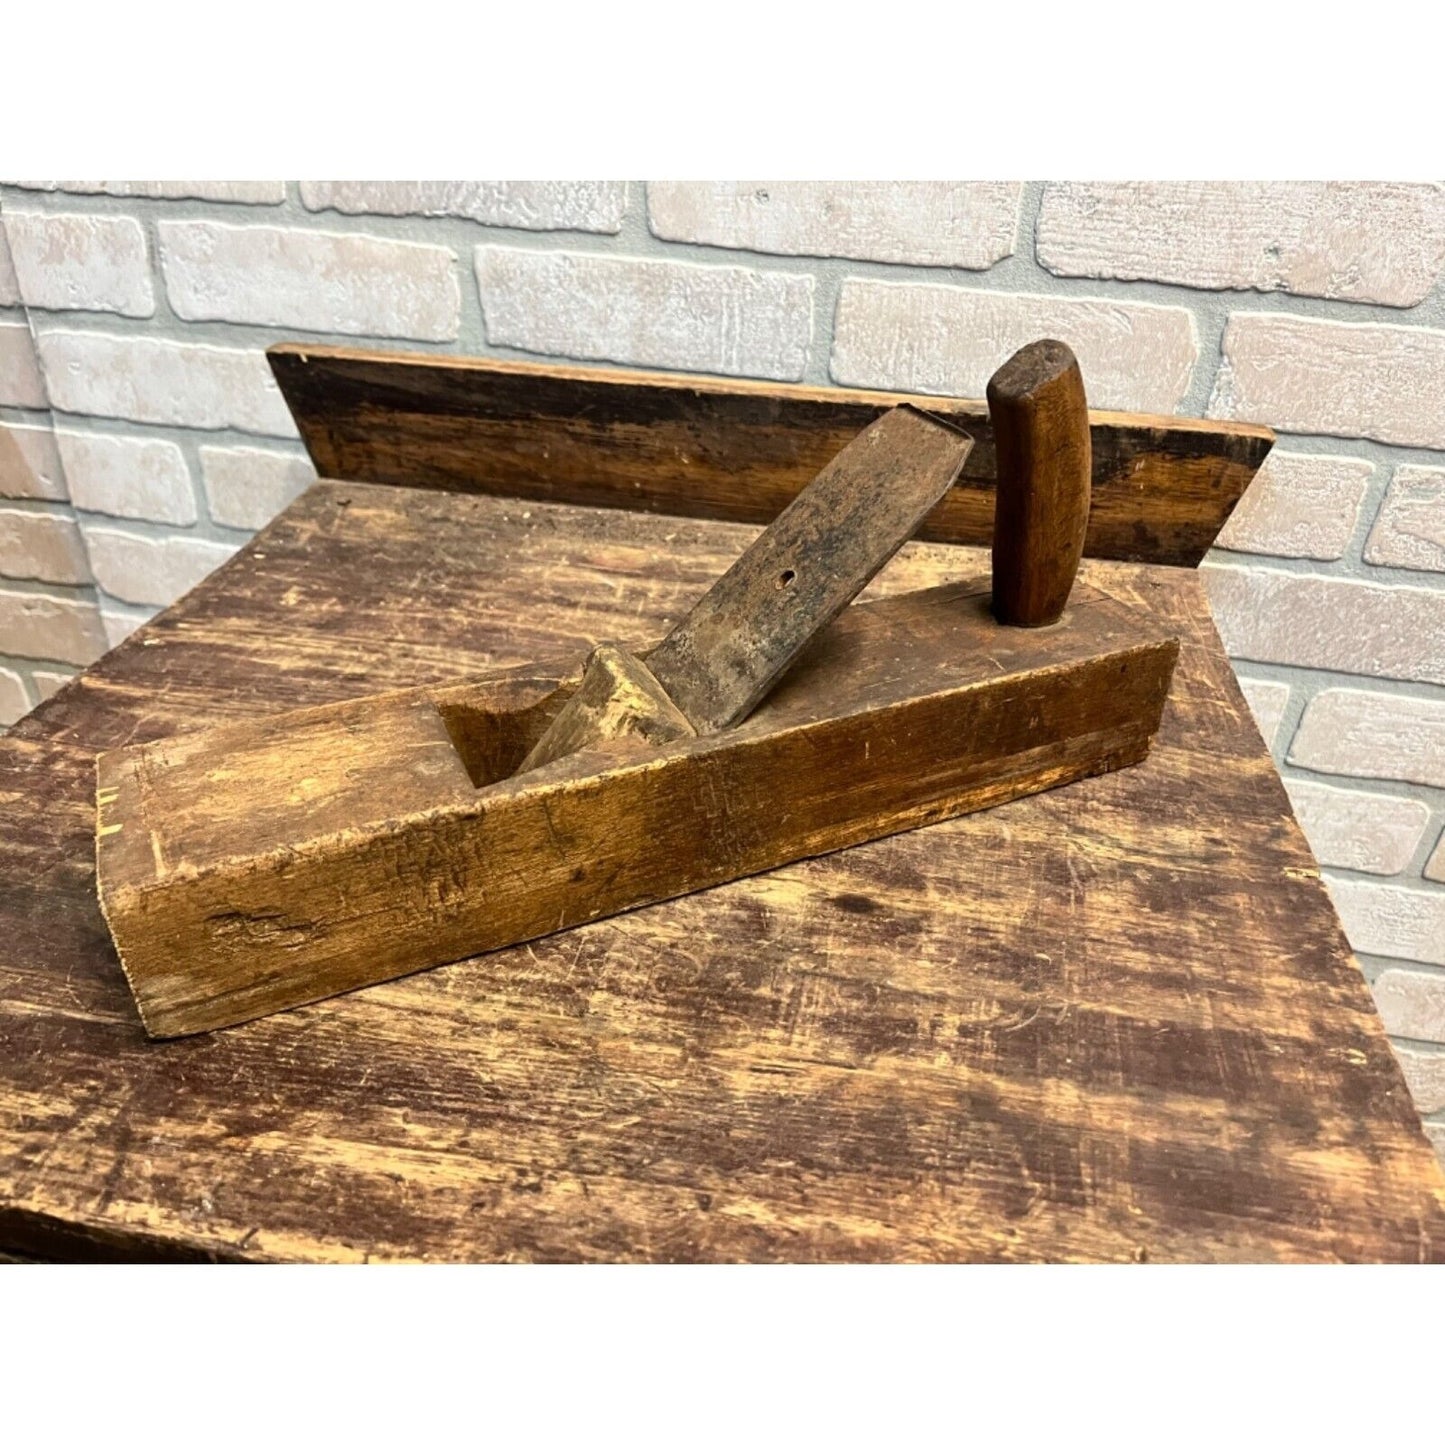 Antique 1890s 14" Woodworking Wood Plane Tool - Unbranded